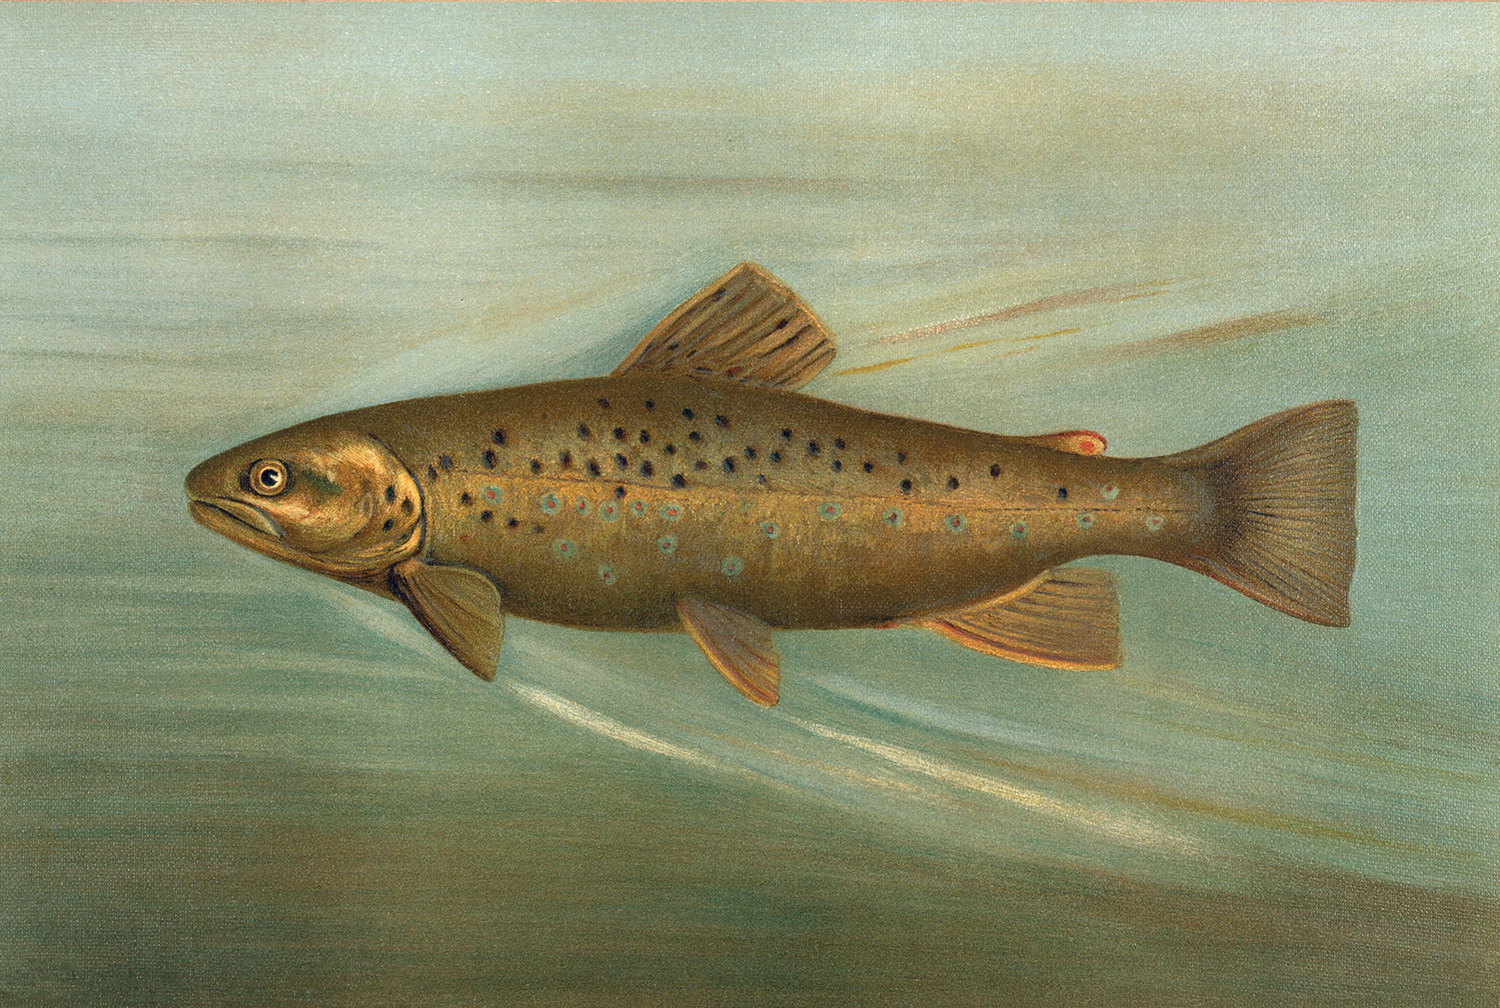 Cabin/Lodge Lodge Brown Trout Reproduction Print, Framed ...